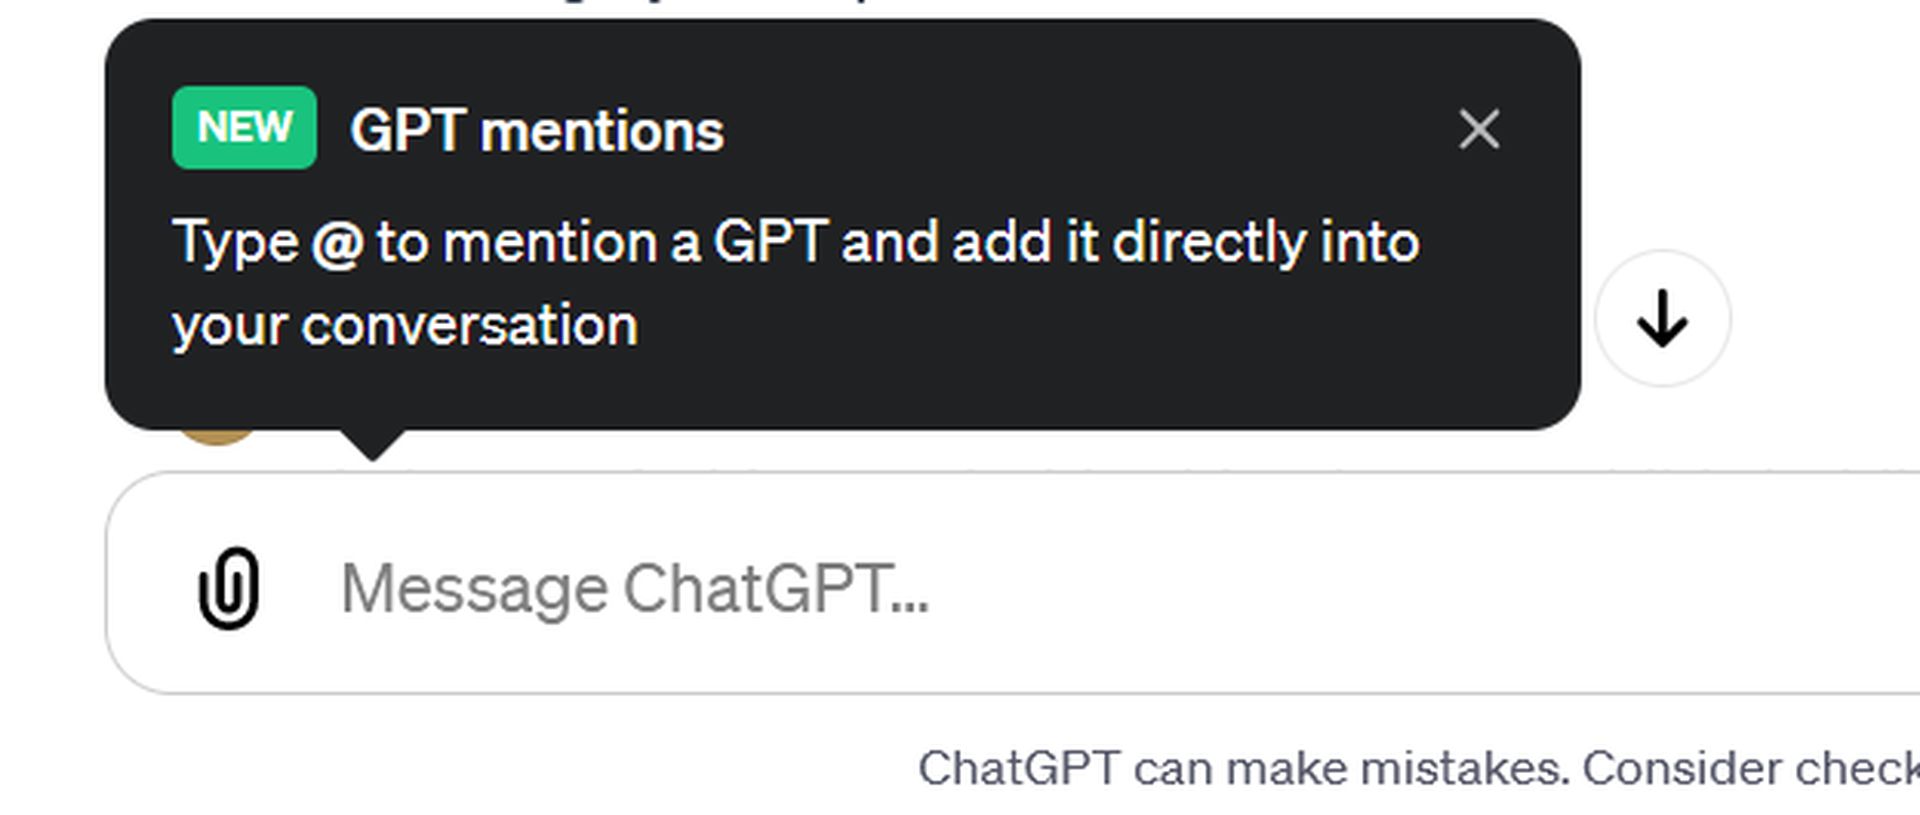 How to use GPT Mentions: The new ChatGPT feature integrate multiple AI models for dynamic interactions and here is how!